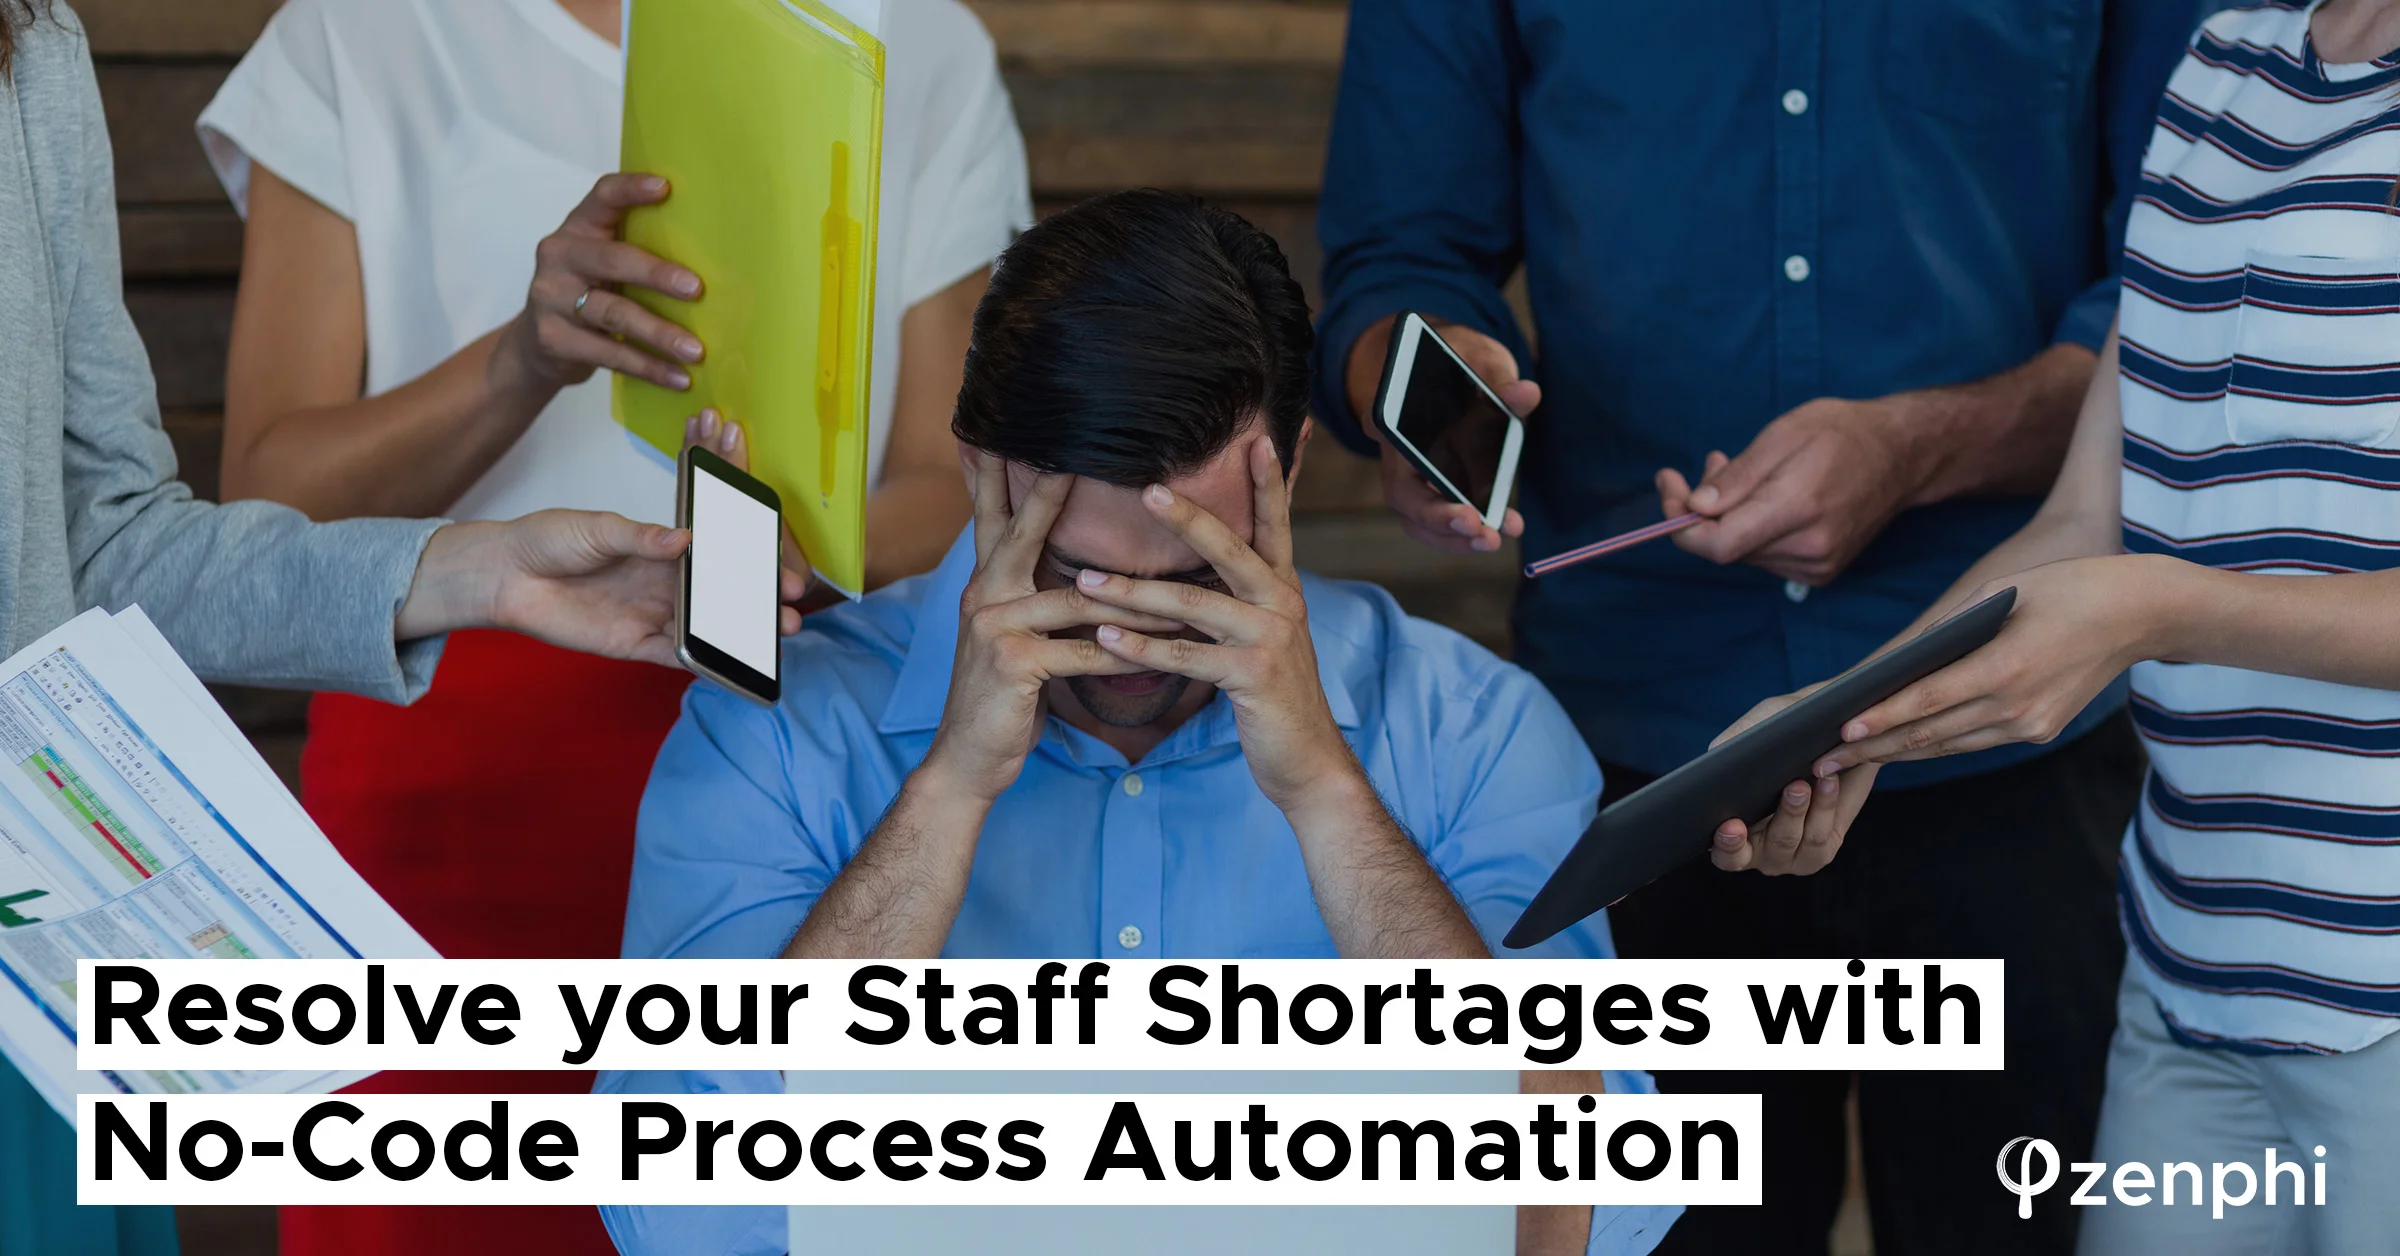 Resolve your Staff Shortages with No-Code Process Automation